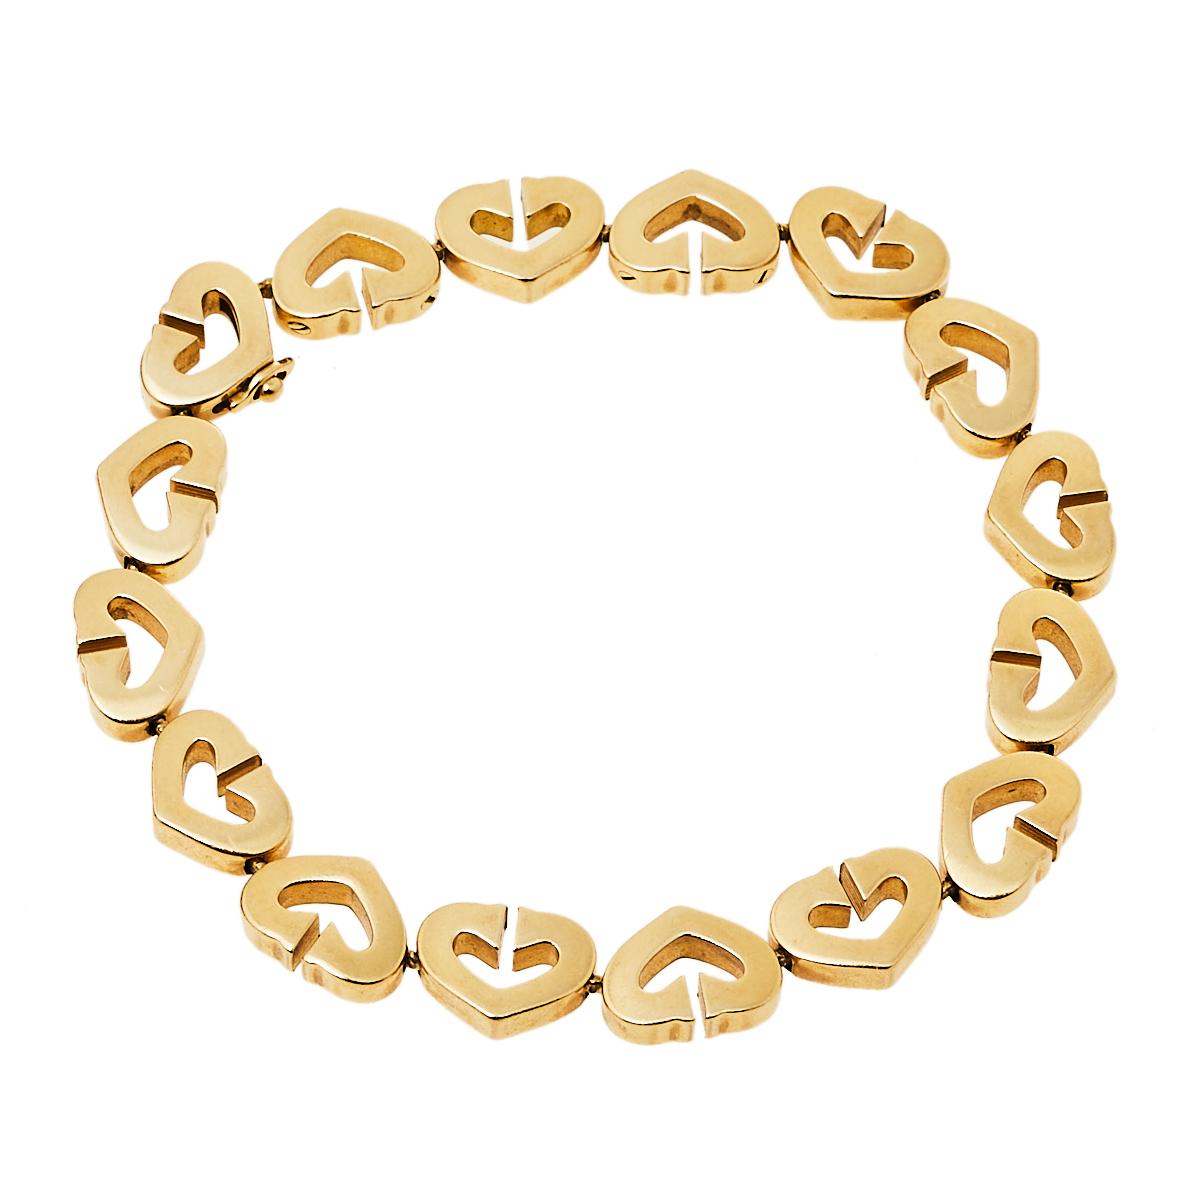 This Cartier piece is a beauty to behold. It has been crafted out of 18k yellow gold and styled in a single strand of heart-shaped links. It also features hallmarks on the inside. This bracelet is classy and will be a fine outfit enhancer.

